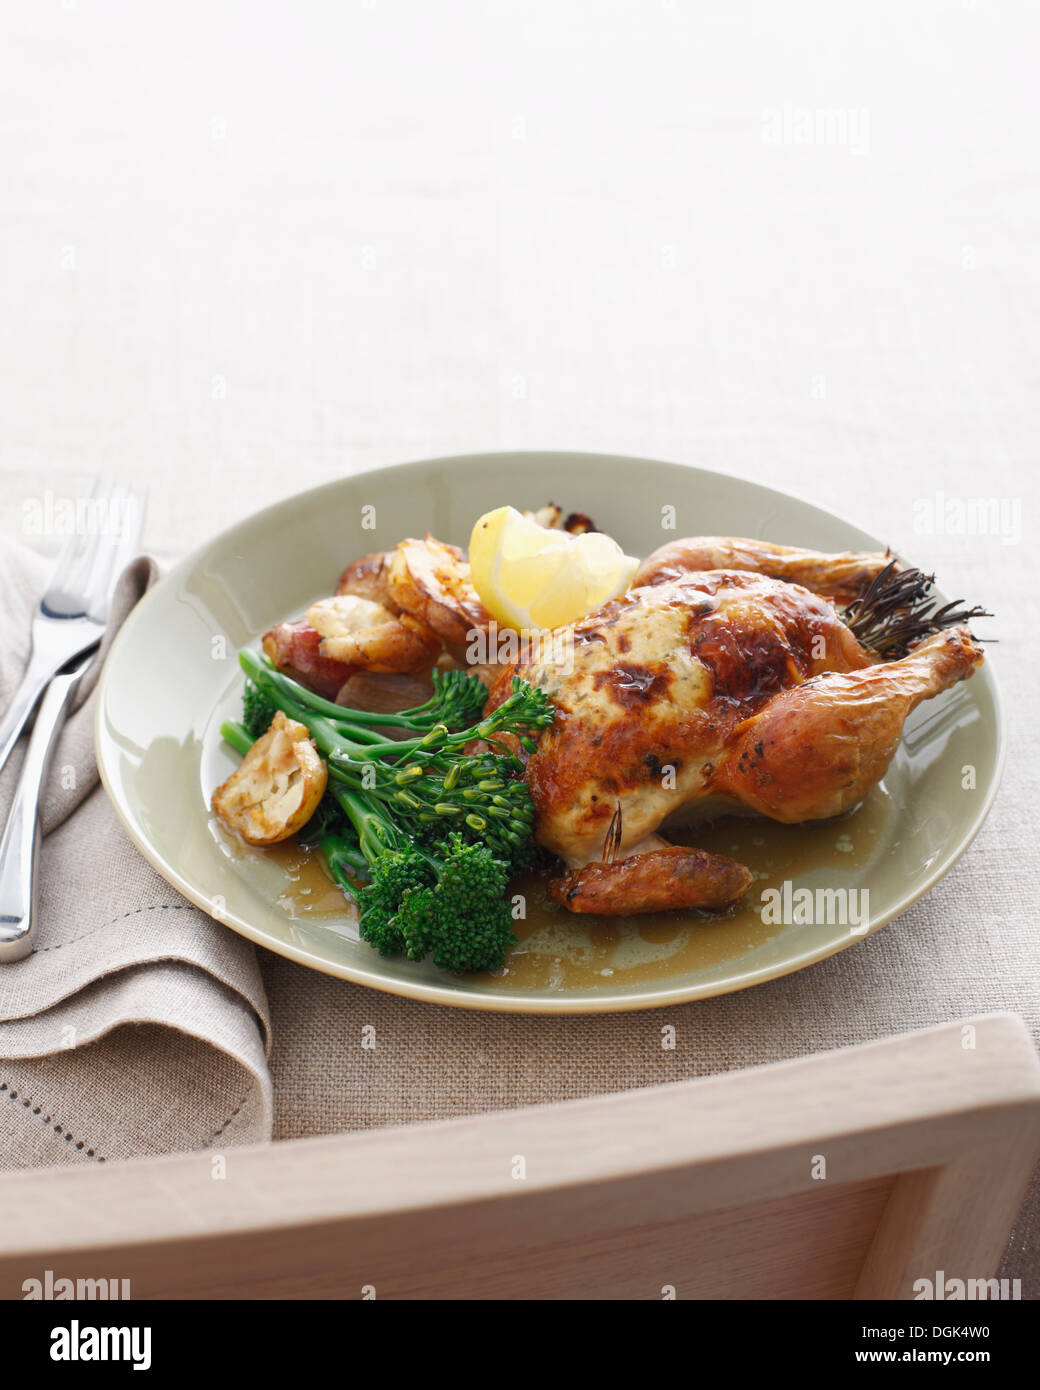 Roast spatchcock with broccolini and roast potatoes Stock Photo